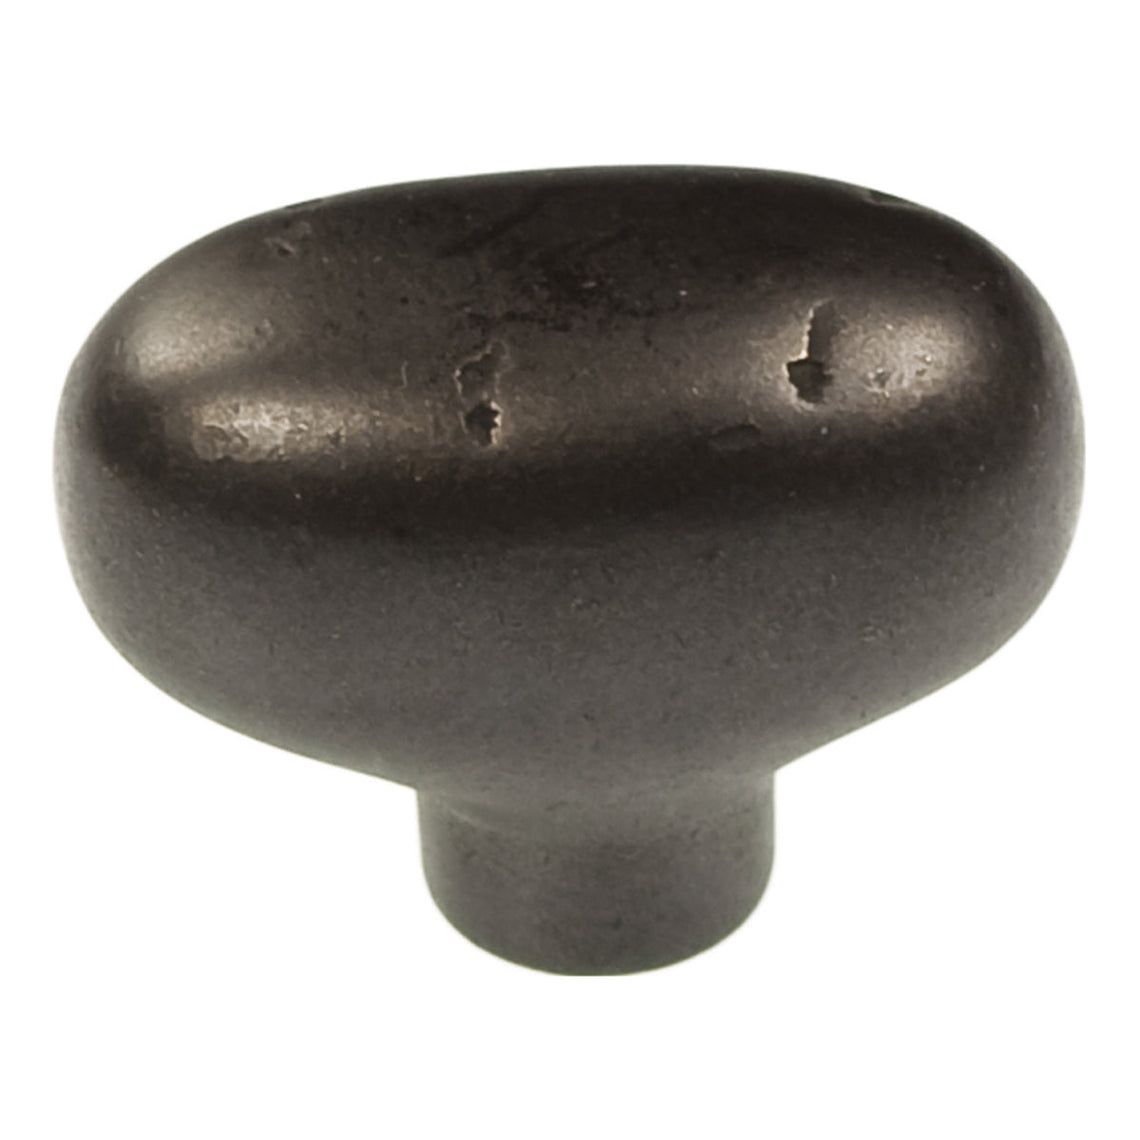 Drawer Knob 1-7/8 Inch x 1 Inch in Black Iron - Carbonite Collection